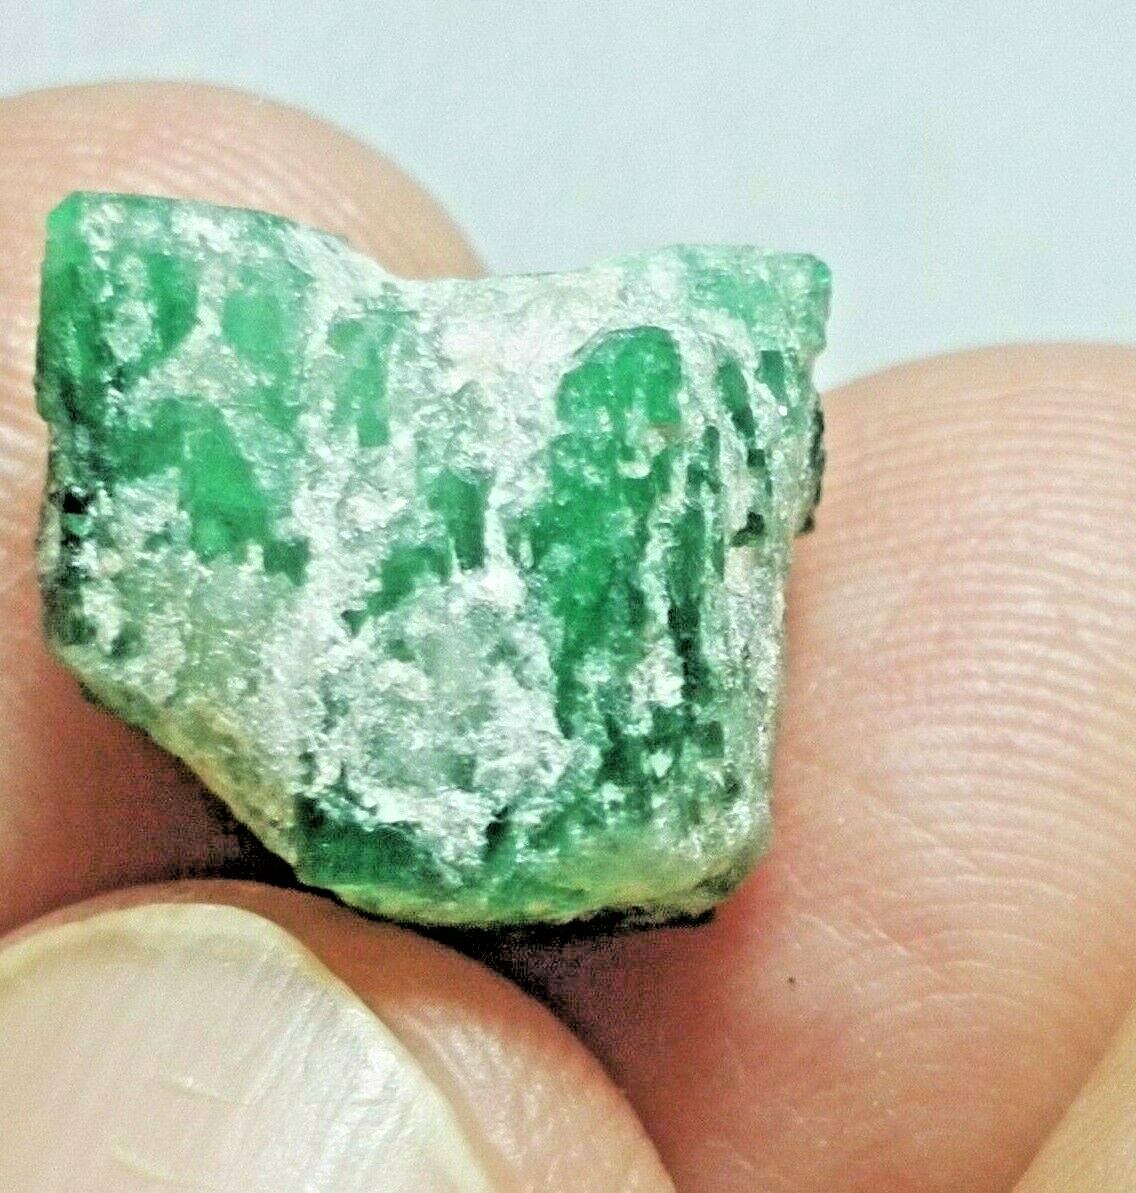 12 cts Emerald Crysta Mineral Specimens  100% Natural from Sawat , Pakistan